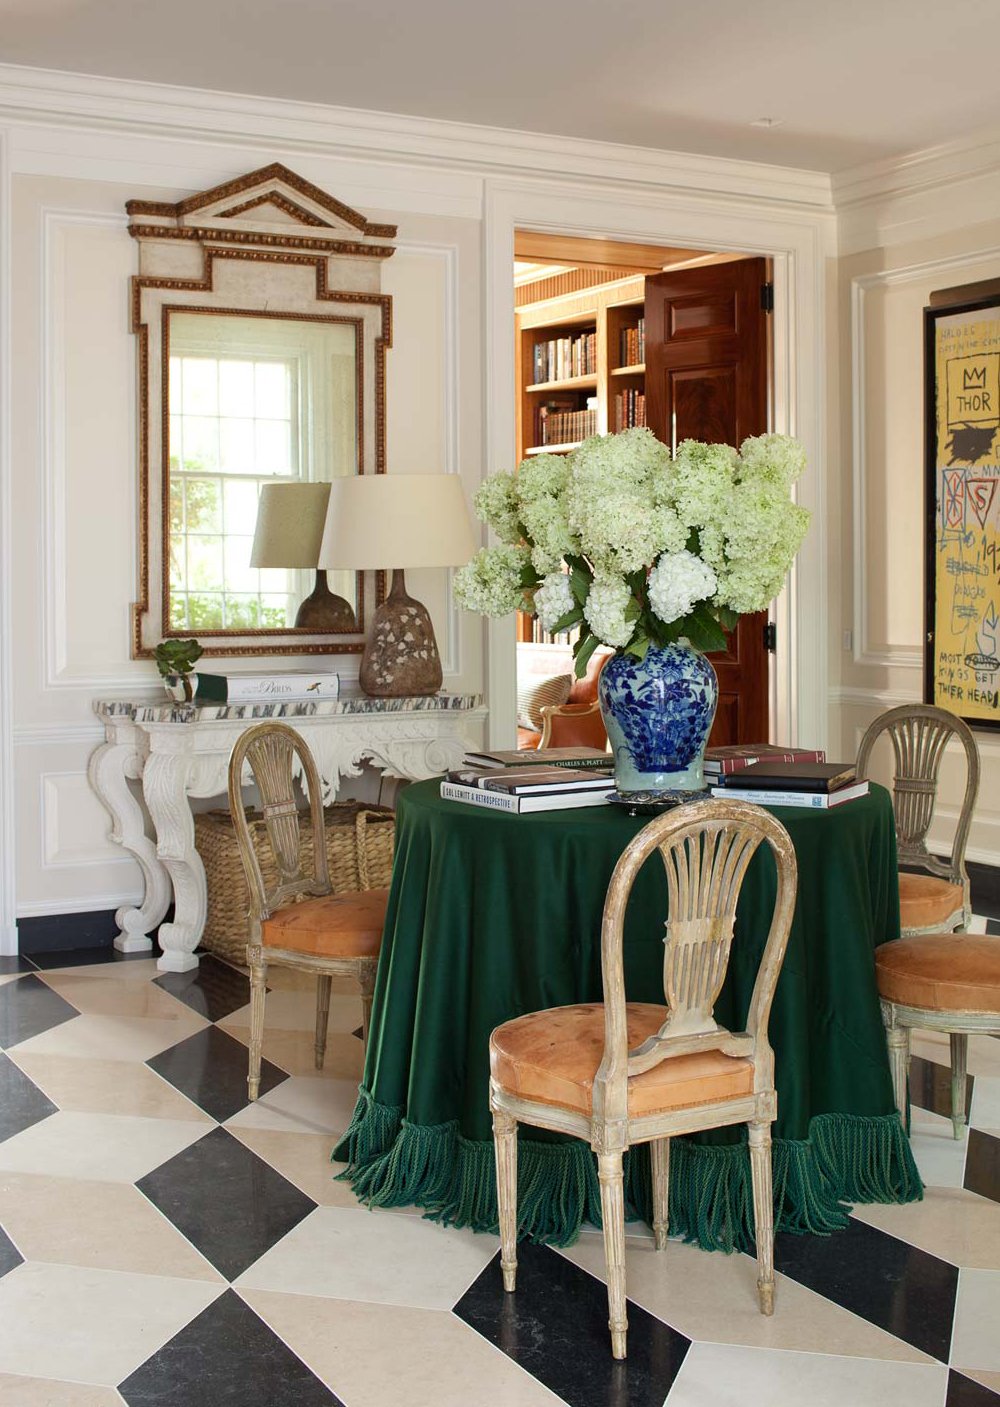 Trend Alert : Skirted Tables - roomfortuesday.com